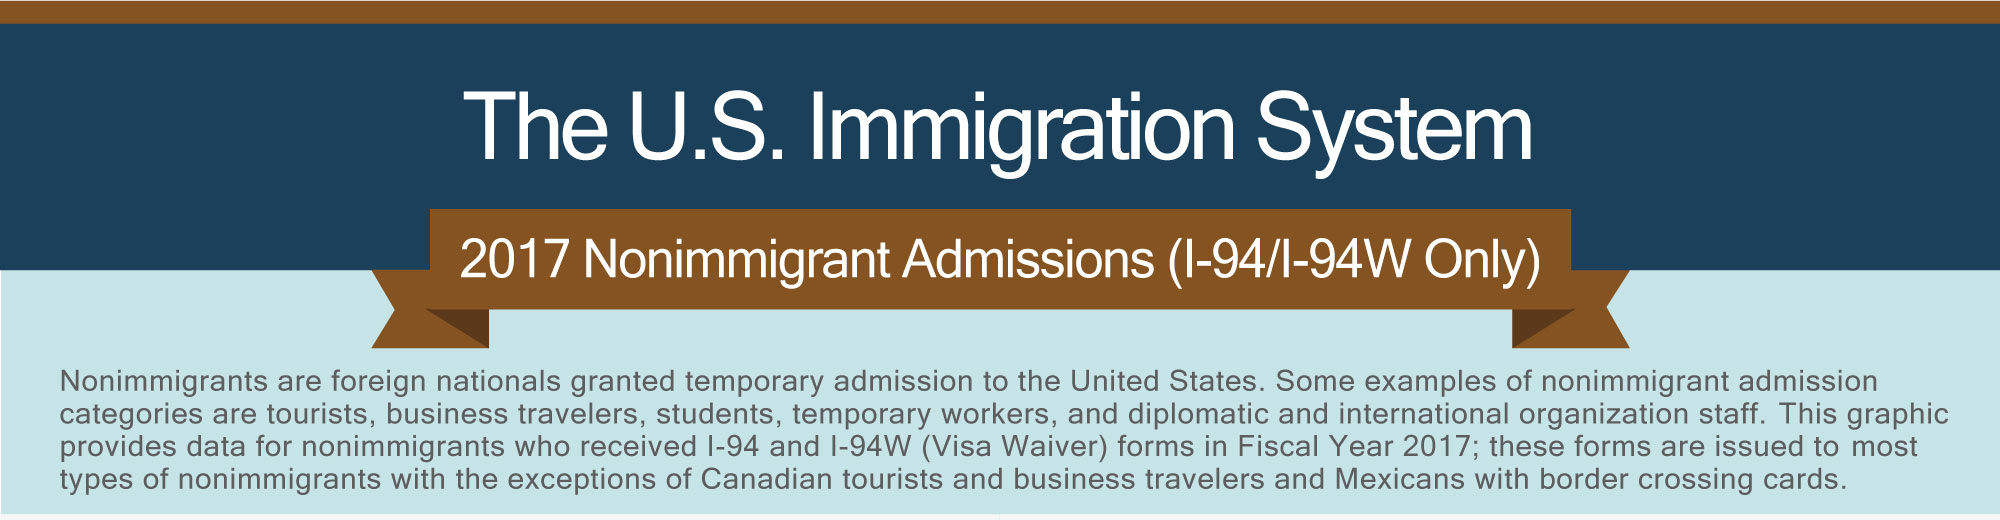 The U.S. Immigration System. 2016 Nonimmigrant Admissions (I-94/I-94W only). Nonimmigrants are foreign nationals granted temporary admission to the United States. Some examples of nonimmigrant admission categories are tourists, business travelers, students, temporary workers, and diplomatic and international organization staff. This graphic provides data for nonimmigrants who received I-94 and I-94W (visa waiver) forms in Fiscal Year 2017; these forms are issued to most types of nonimmigrants with the exceptions of Canadian tourists and business travelers and Mexicans with border crossing cards.